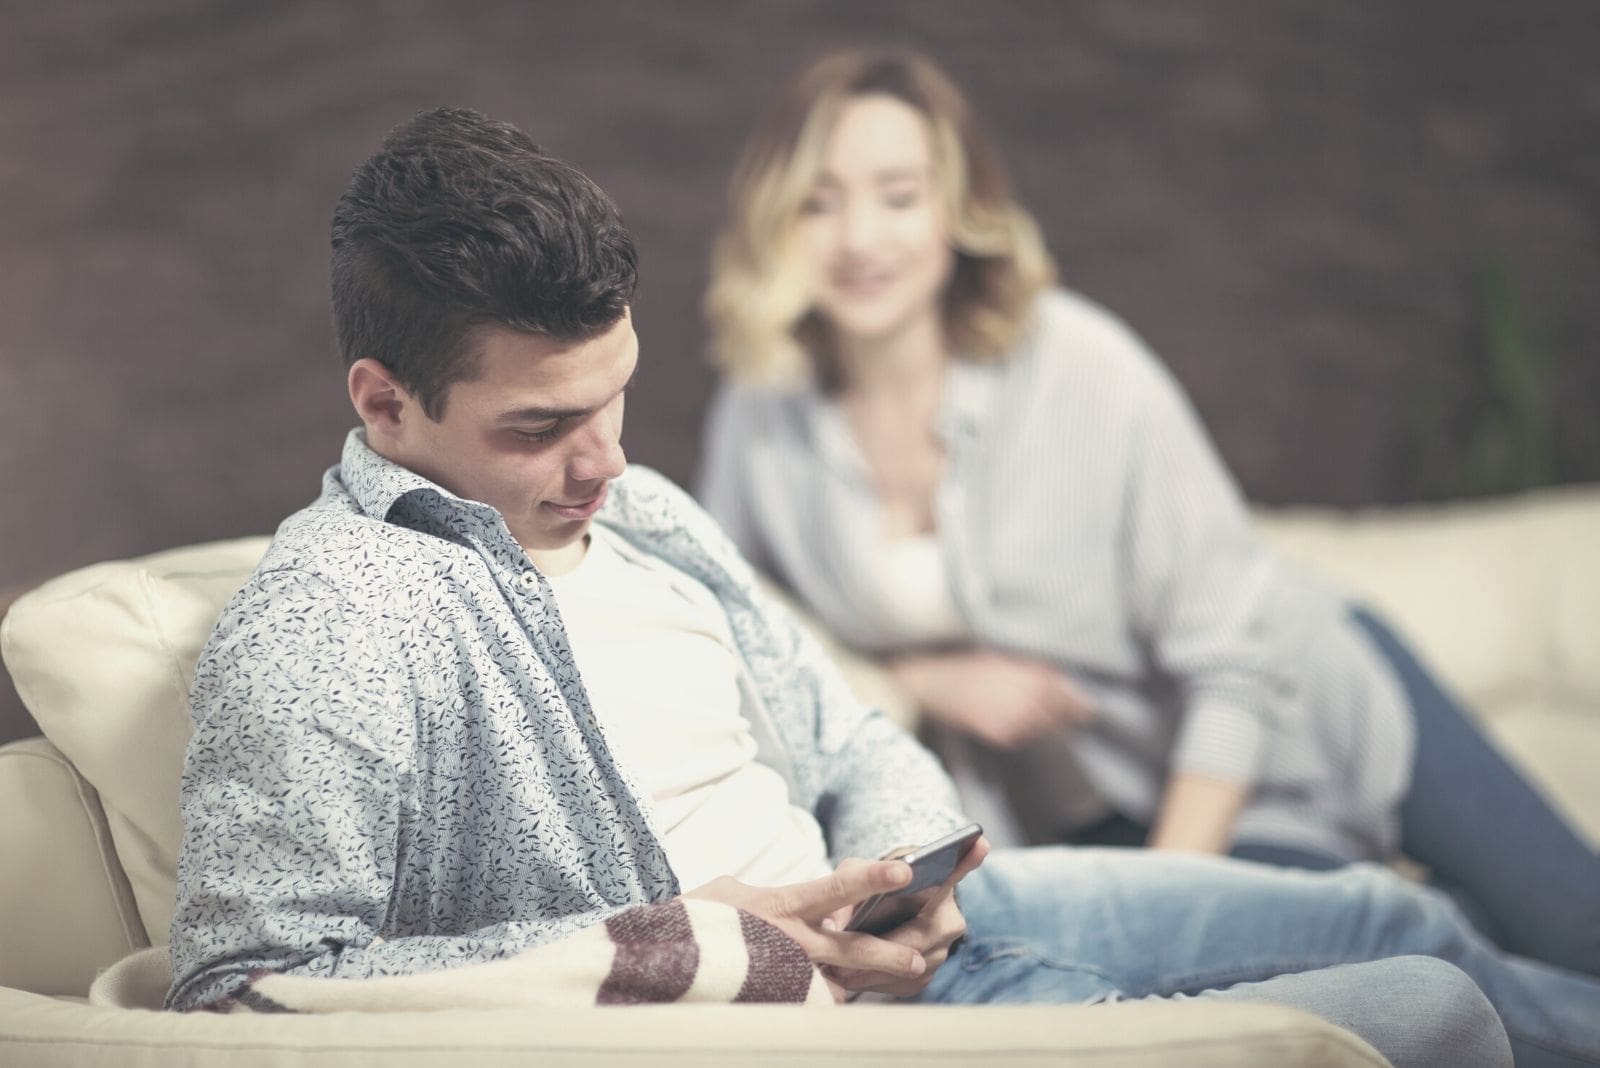 man texting in focus while sitting near a blurry woman snooping at his phone 